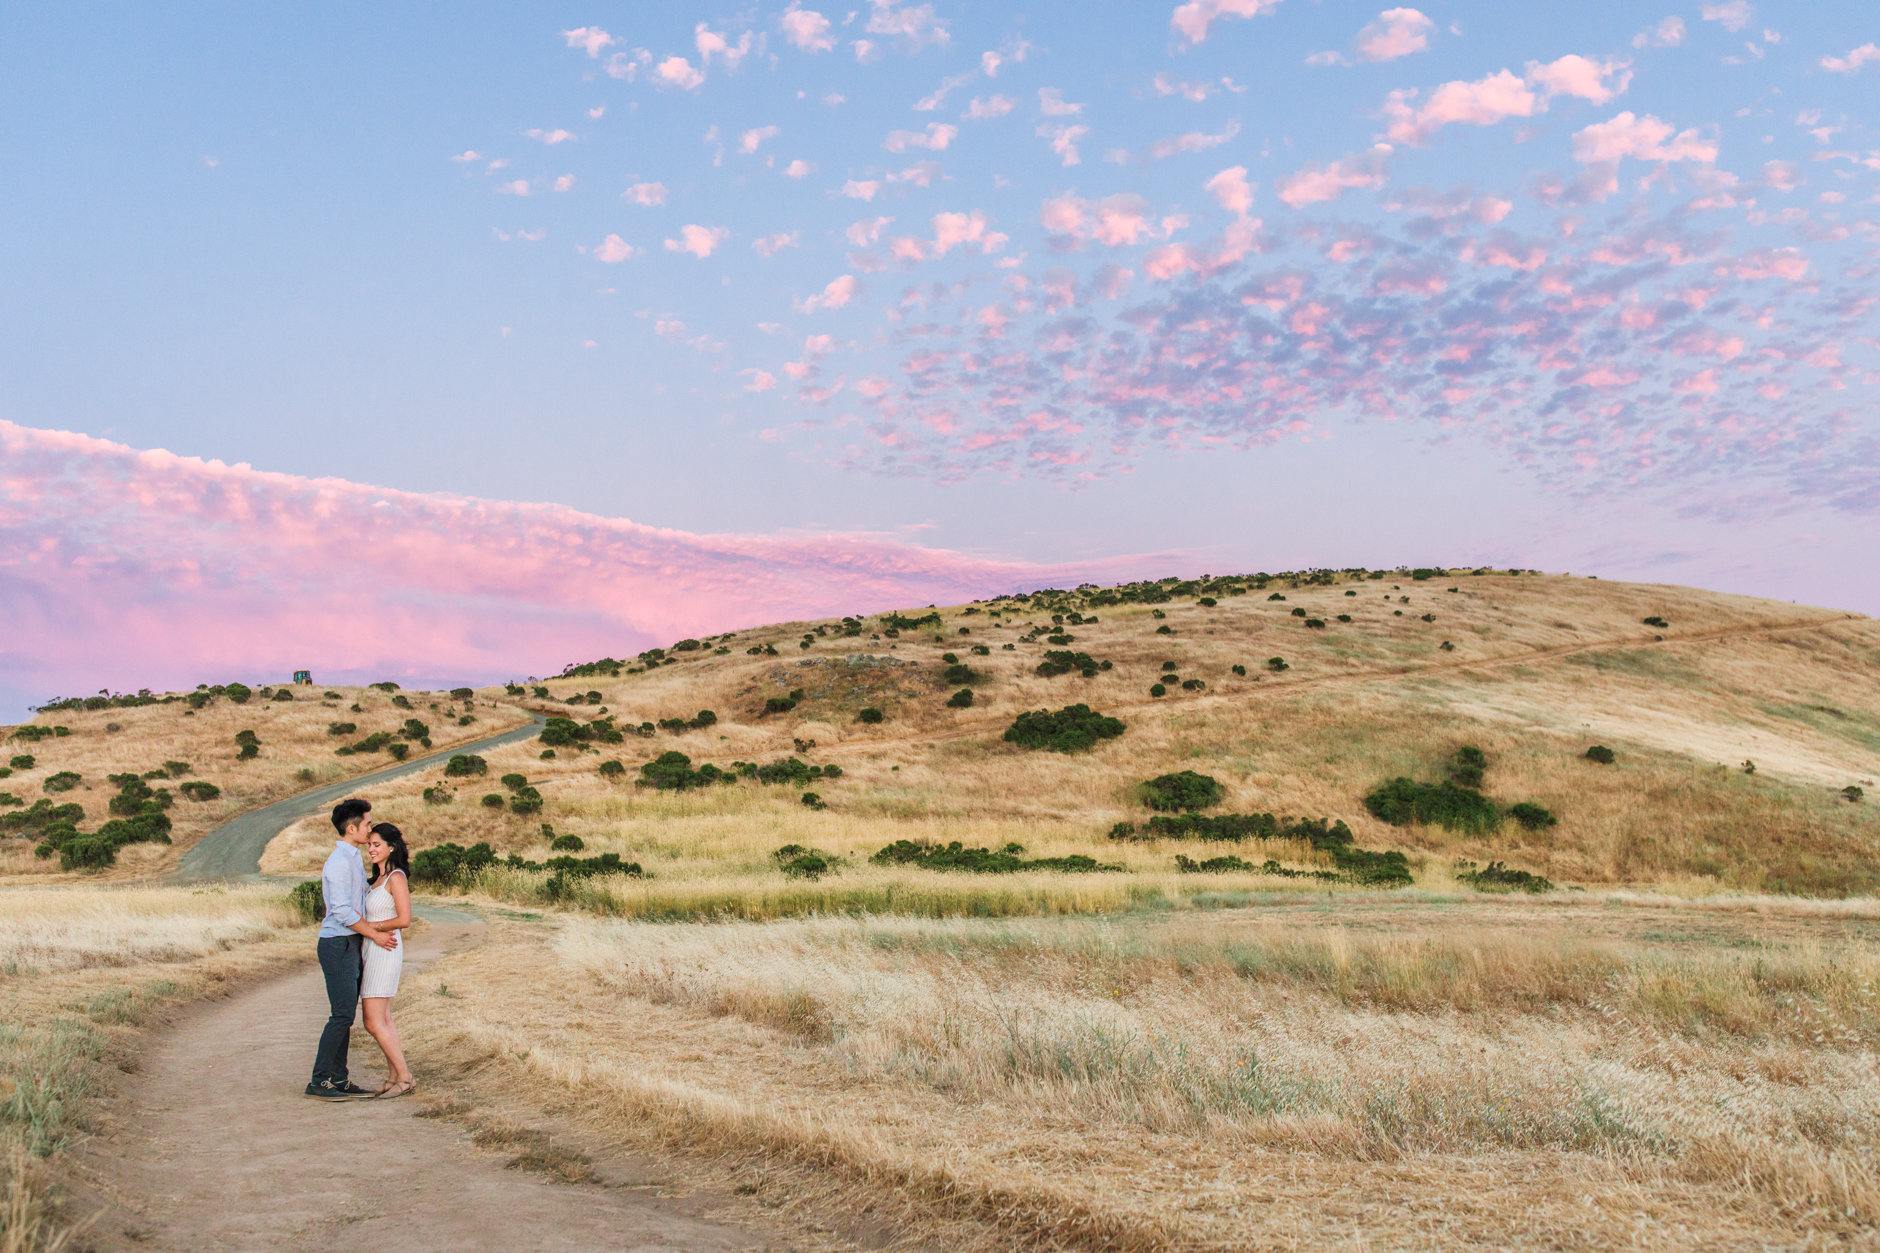 Groom kissing bride on forehead at sunset during Silicon Valley engagement session